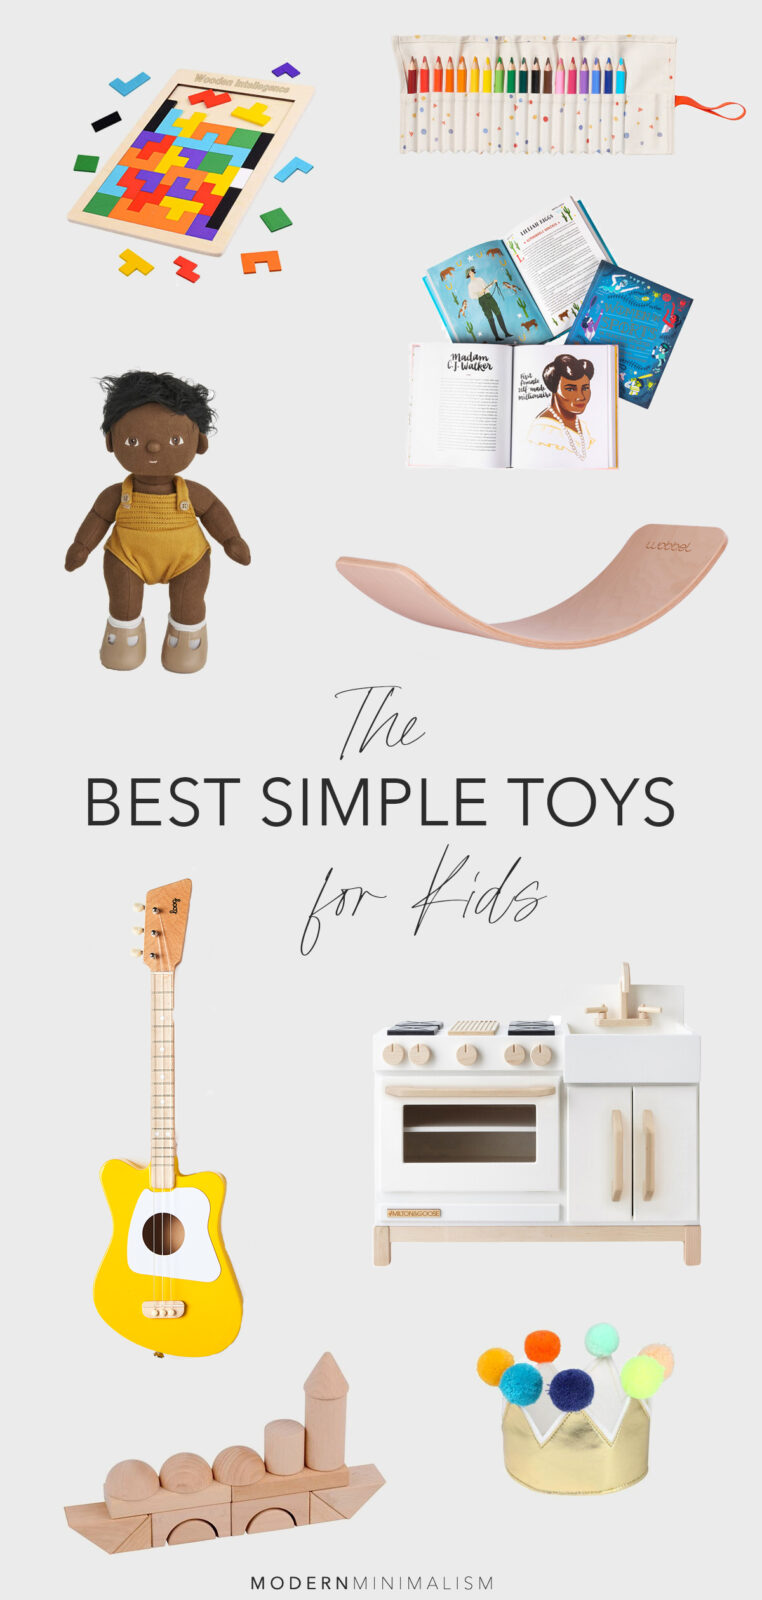 Minimalist Toys for Toddlers: Choosing Quality Over Quantity